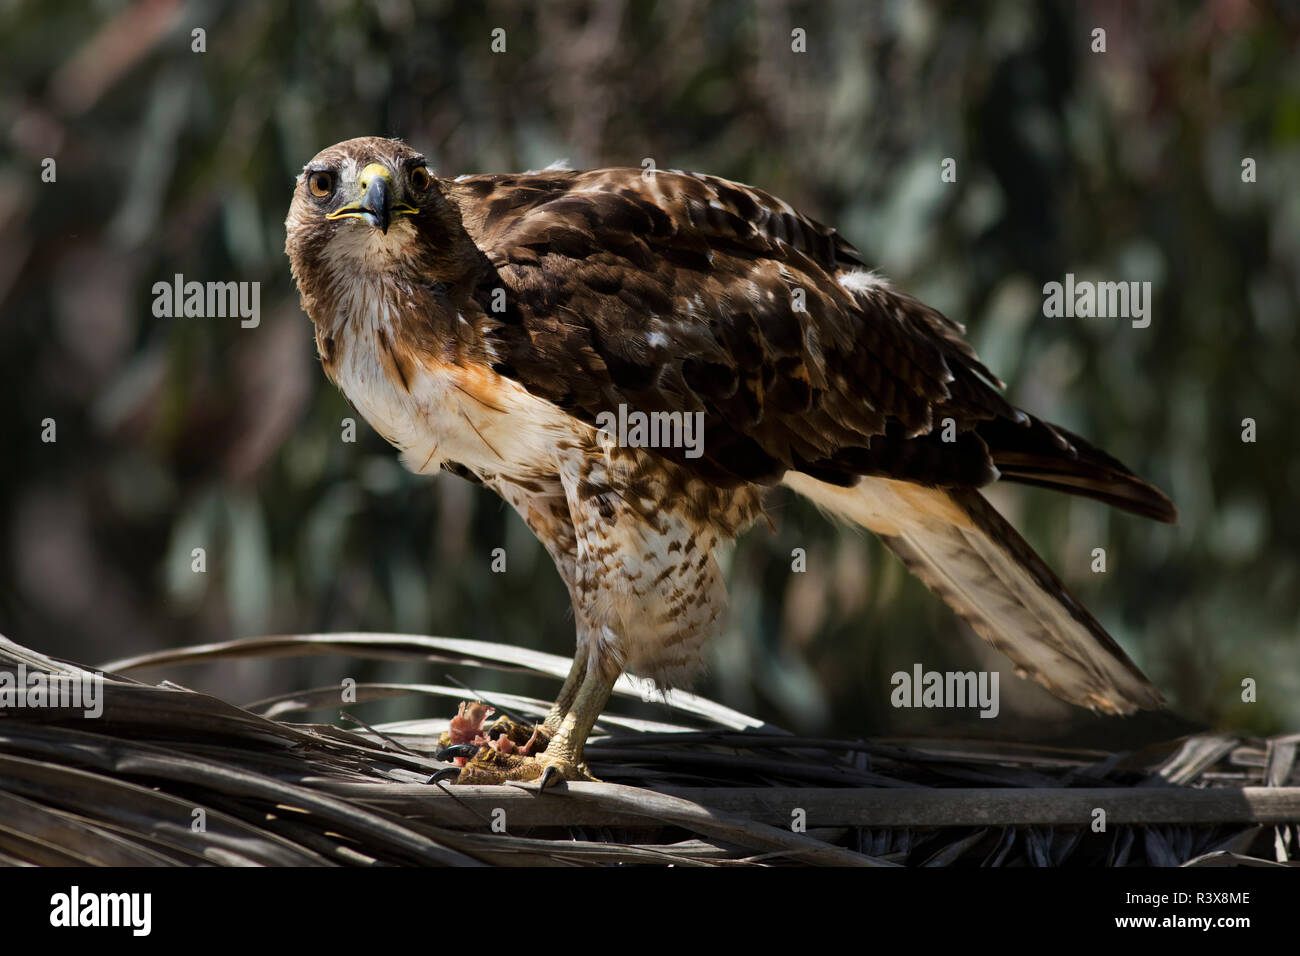 USA, California. Red-tailed hawk with prey. Credit as: Christopher Talbot Frank / Jaynes Gallery / DanitaDelimont. com Stock Photo